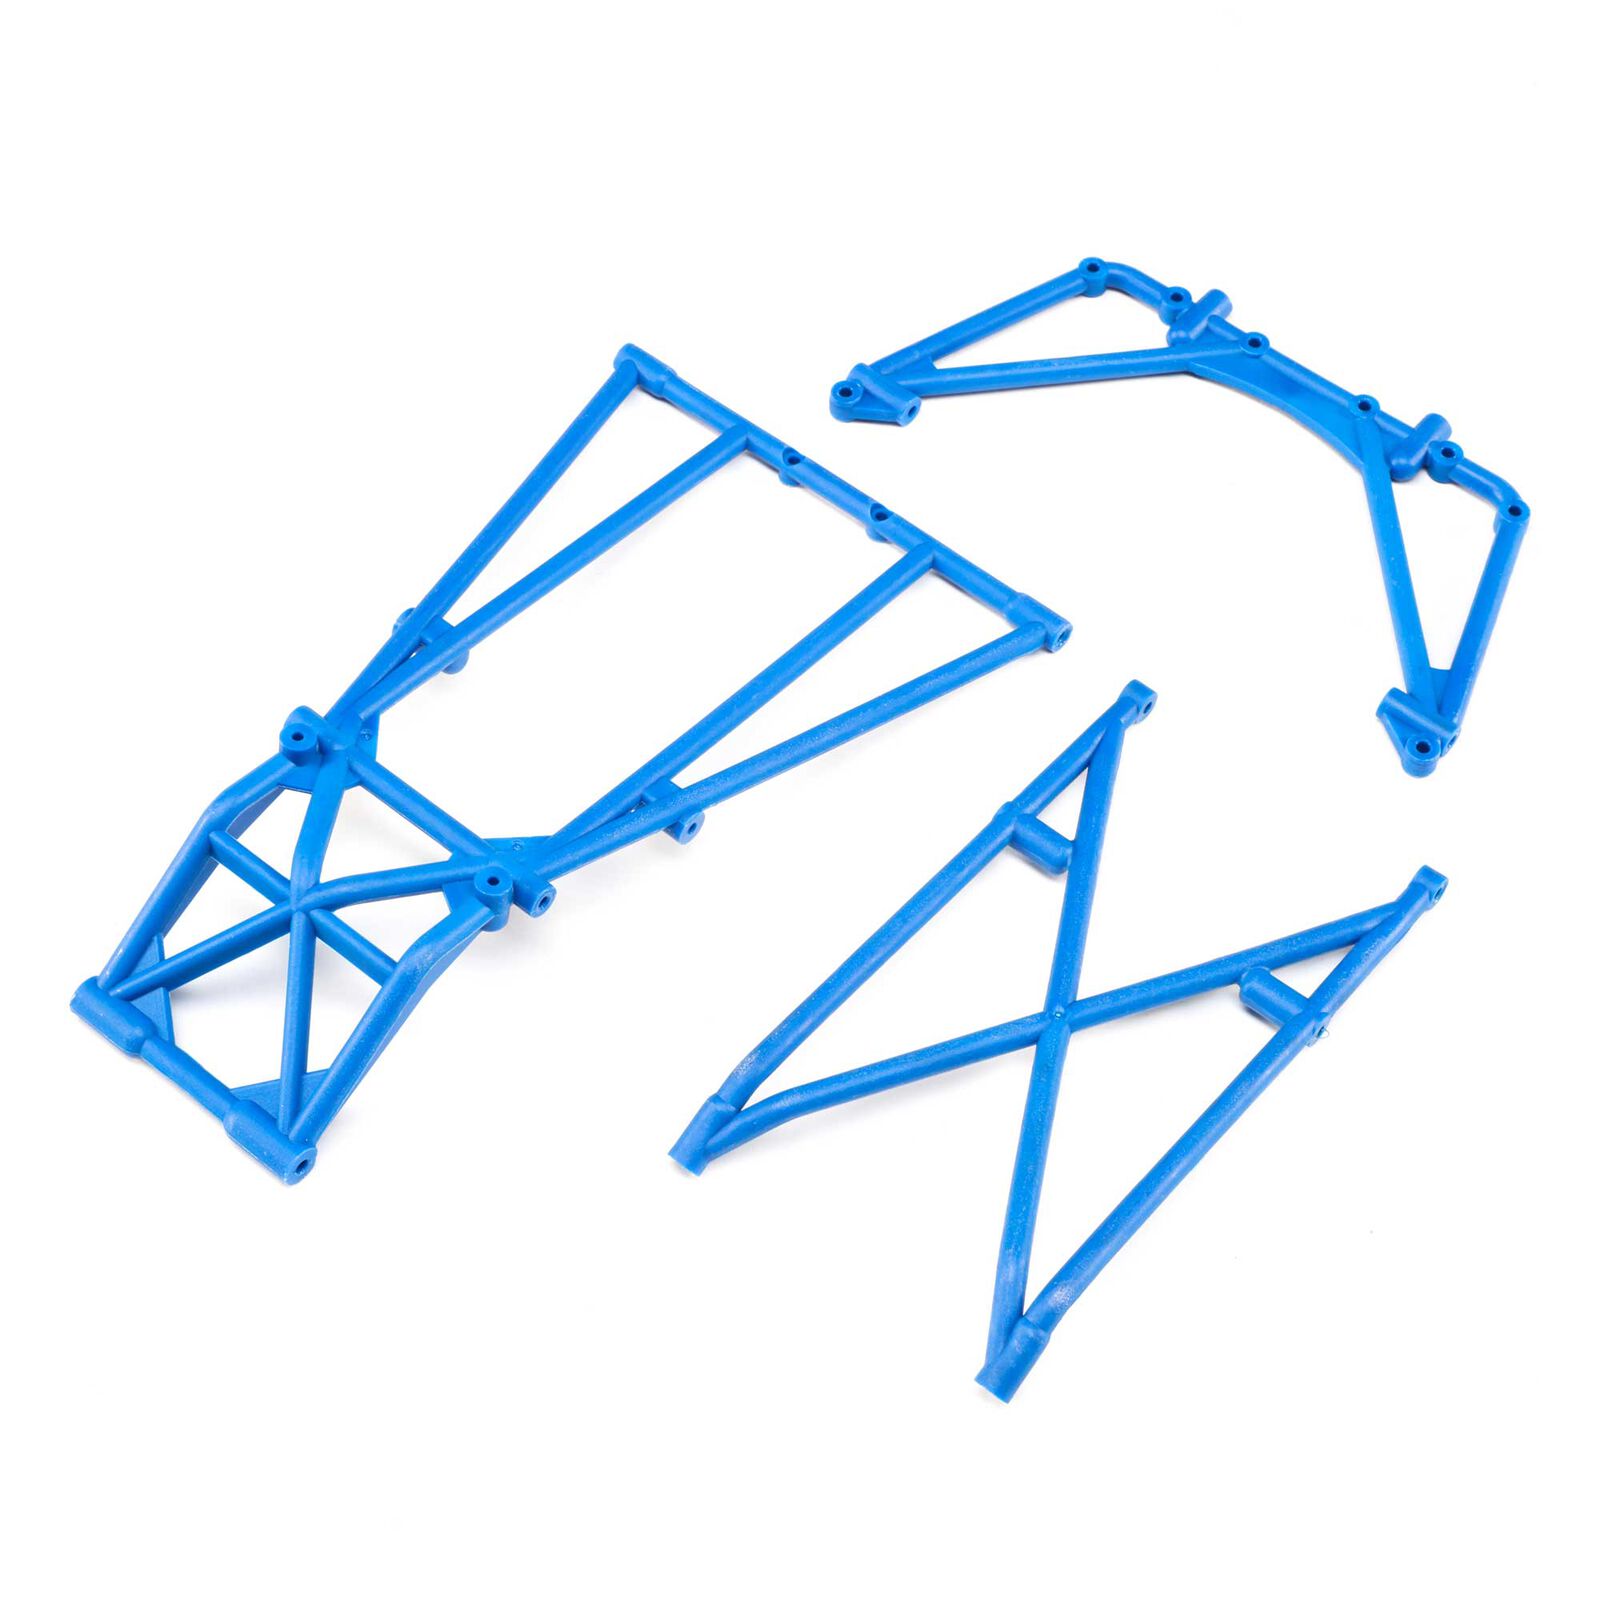 Rear Cage and Hoop Bars, Blue: LMT